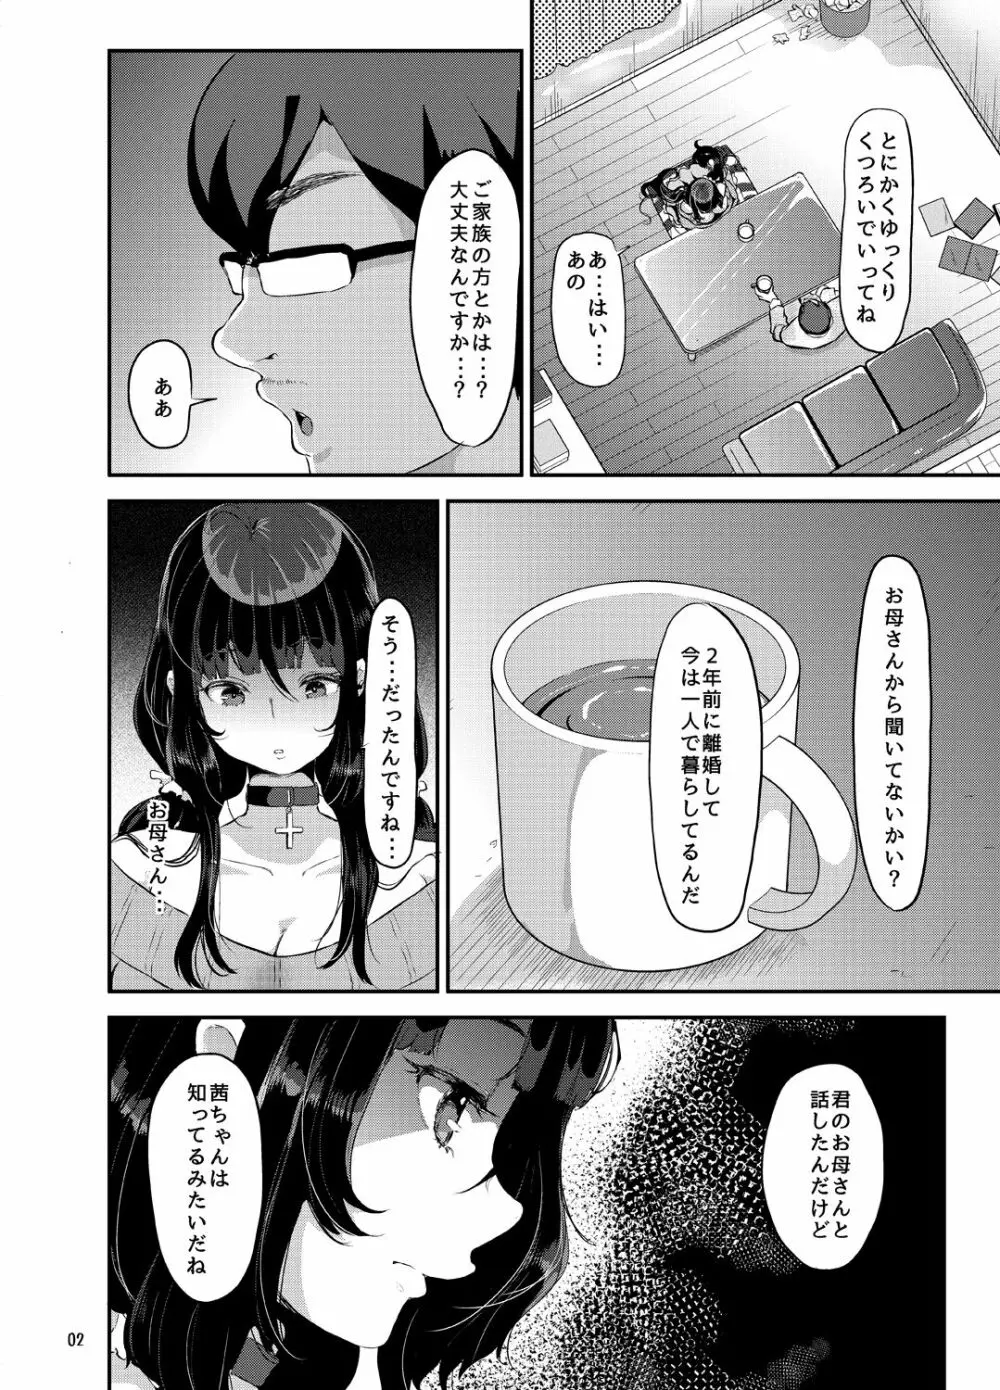 好き好き好き好き好き好き好き好き ver.4 Page.3